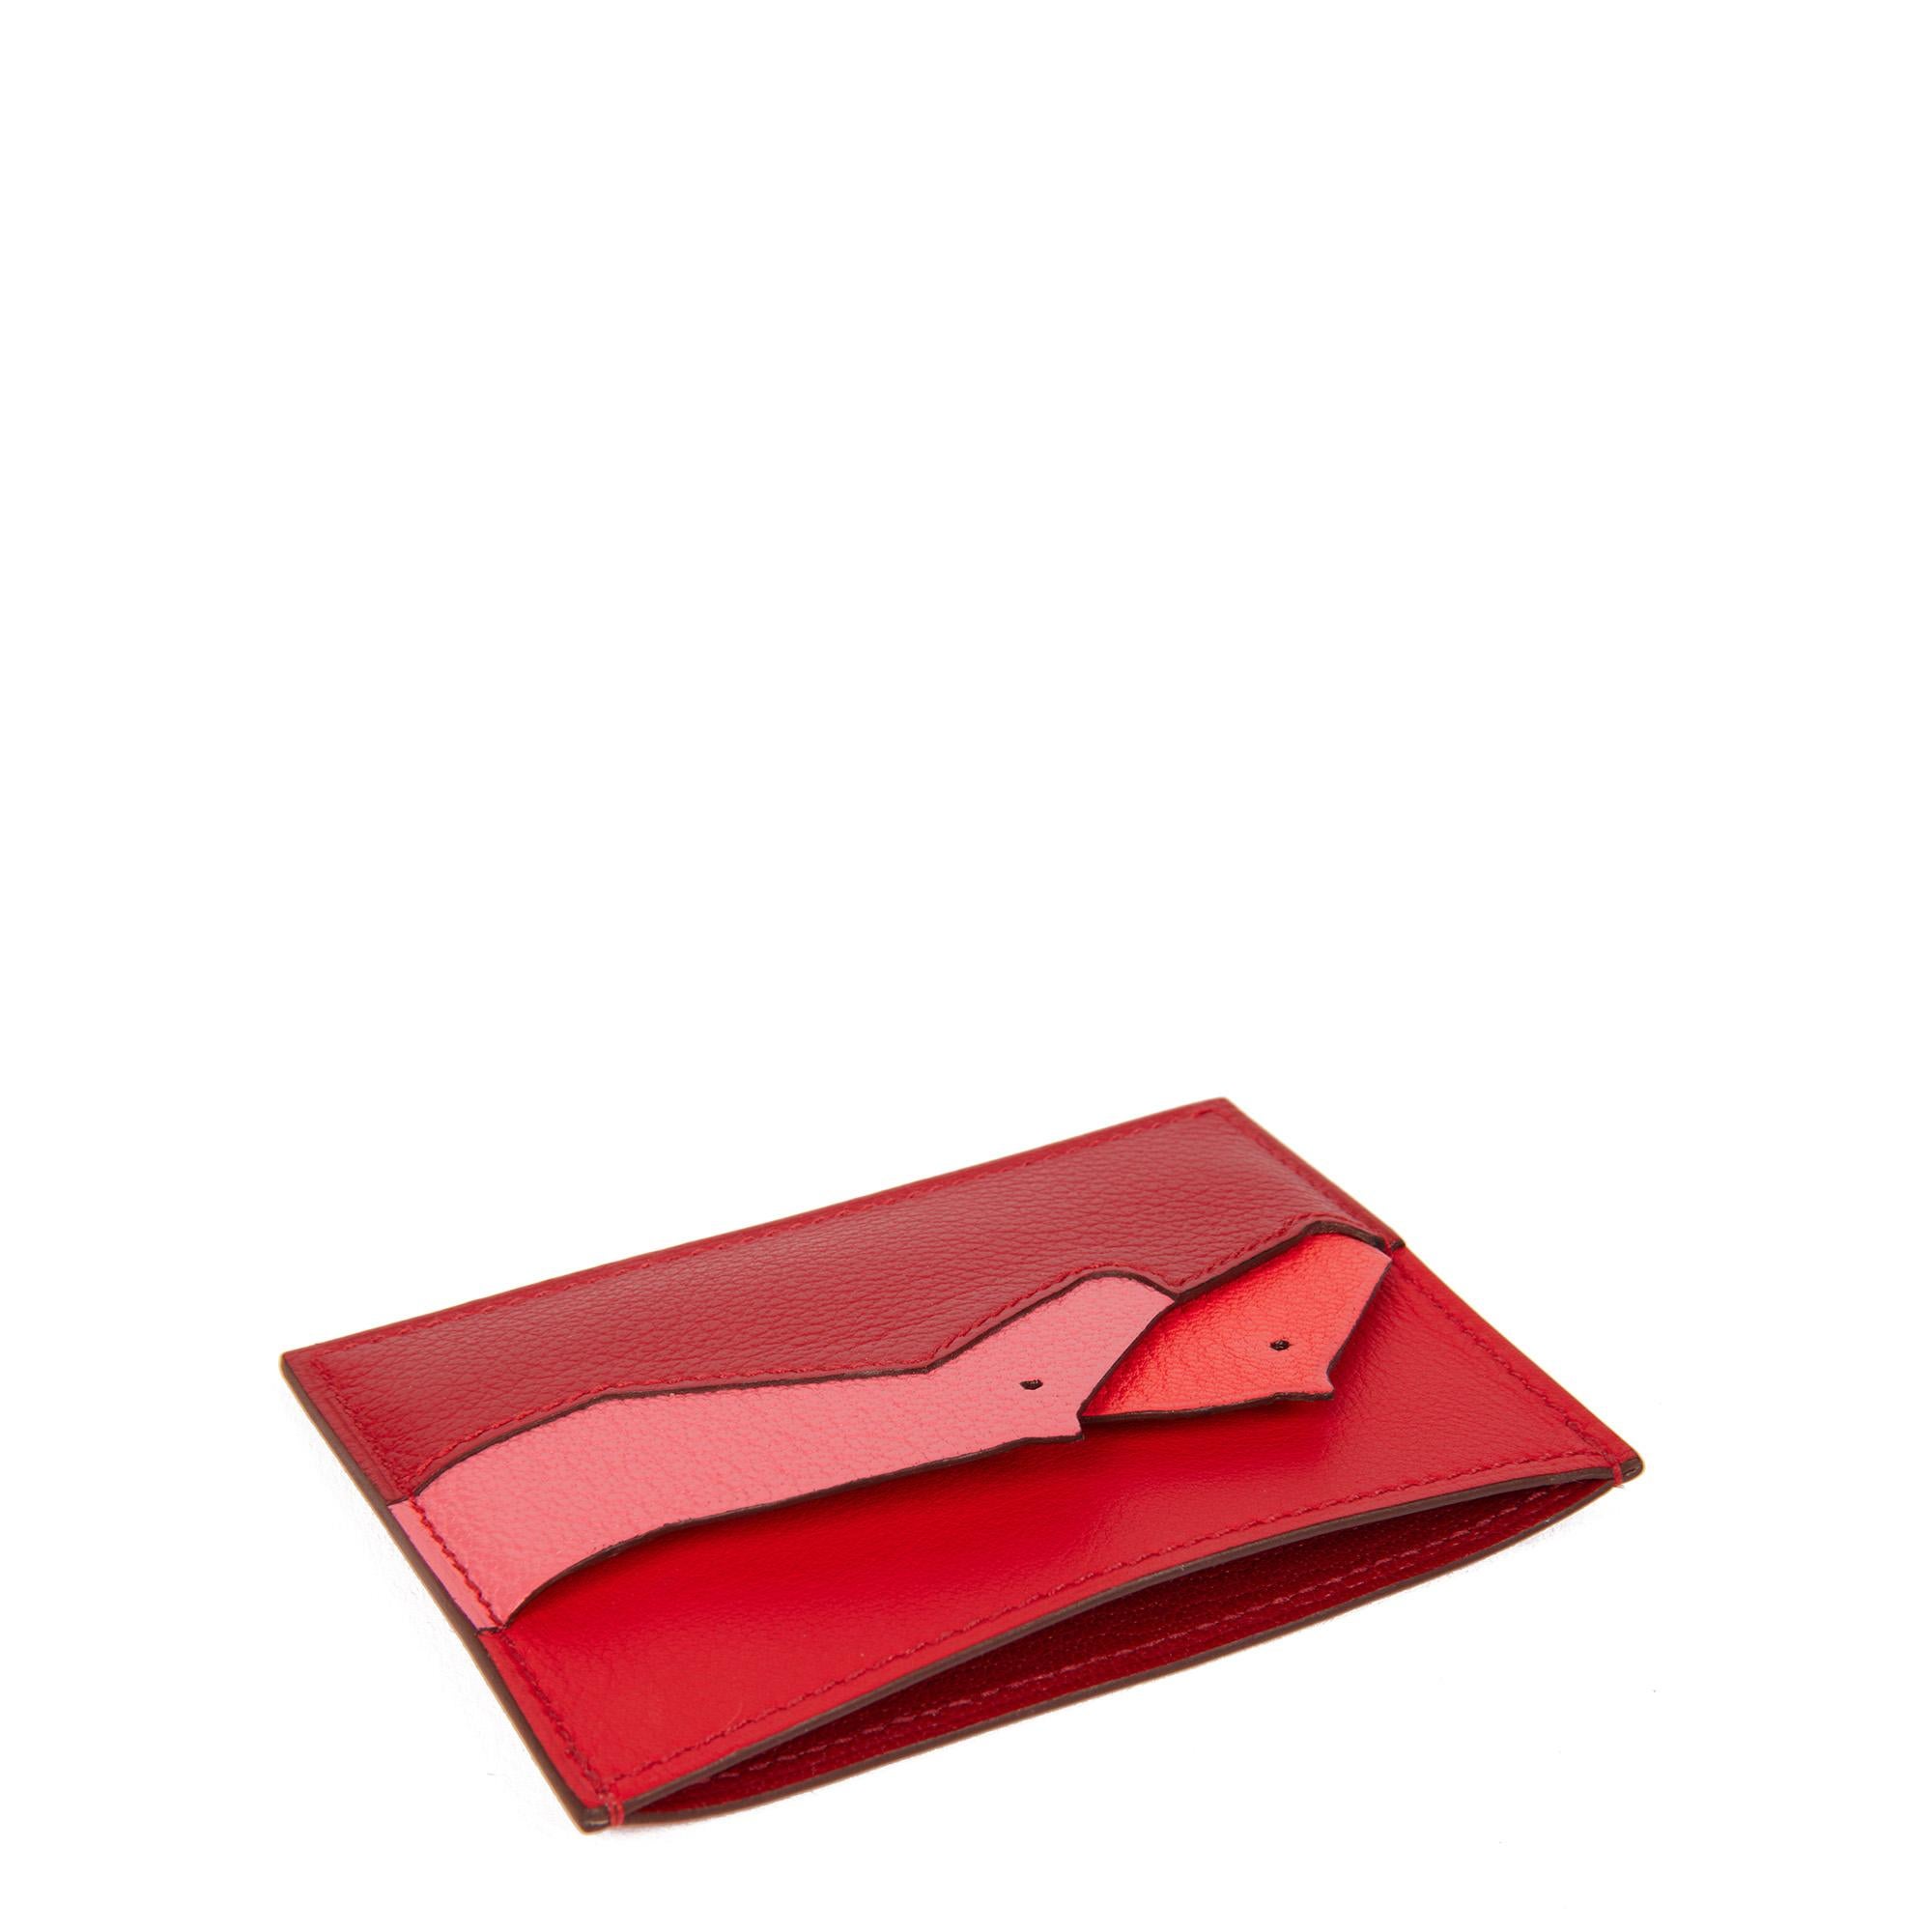 Hermès PIMENT EVERCOLOUR LEATHER, ROUGE DE CŒUR SWIFT LEATHER & ROSE LIPSTICK, ROSE TEXAS CHEVRE MYSORE LES PETITS CHEVAUX CARD HOLDER

CONDITION NOTES
The exterior is in exceptional condition with minimal signs of use.
The interior is in